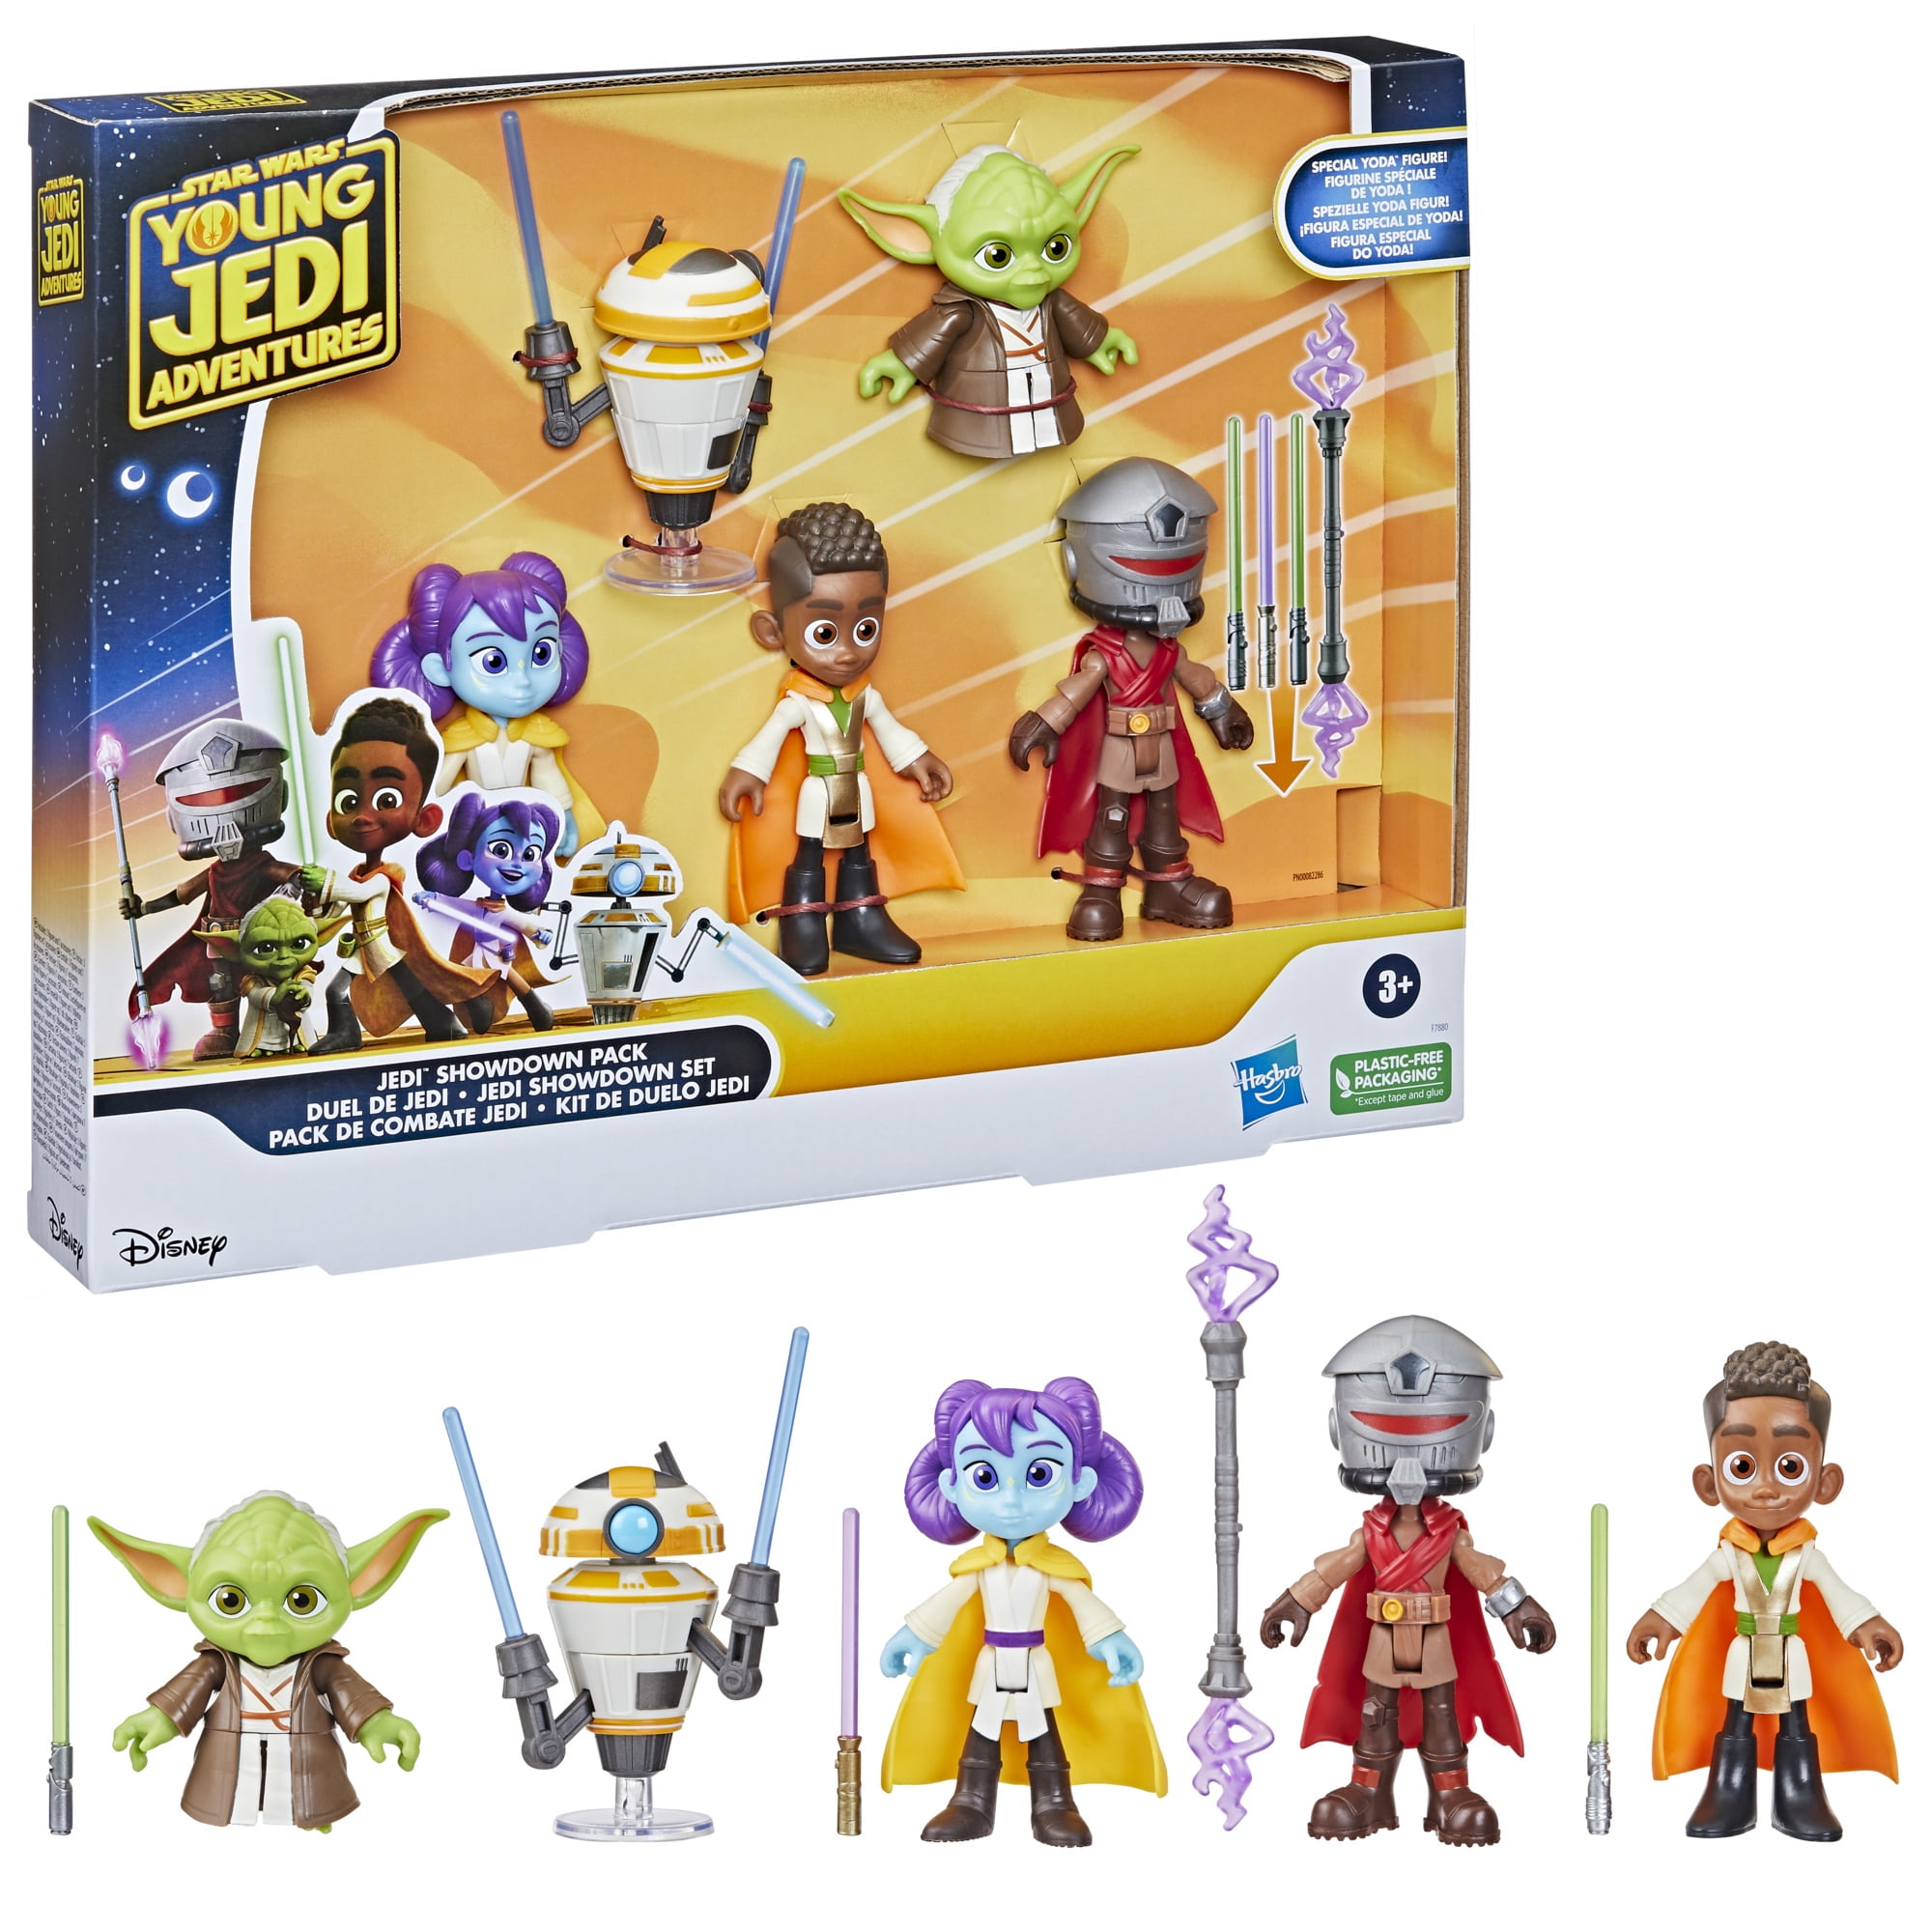 Star Wars: Young Jedi Adventures Kai Brightstar And Yoda, 49% OFF